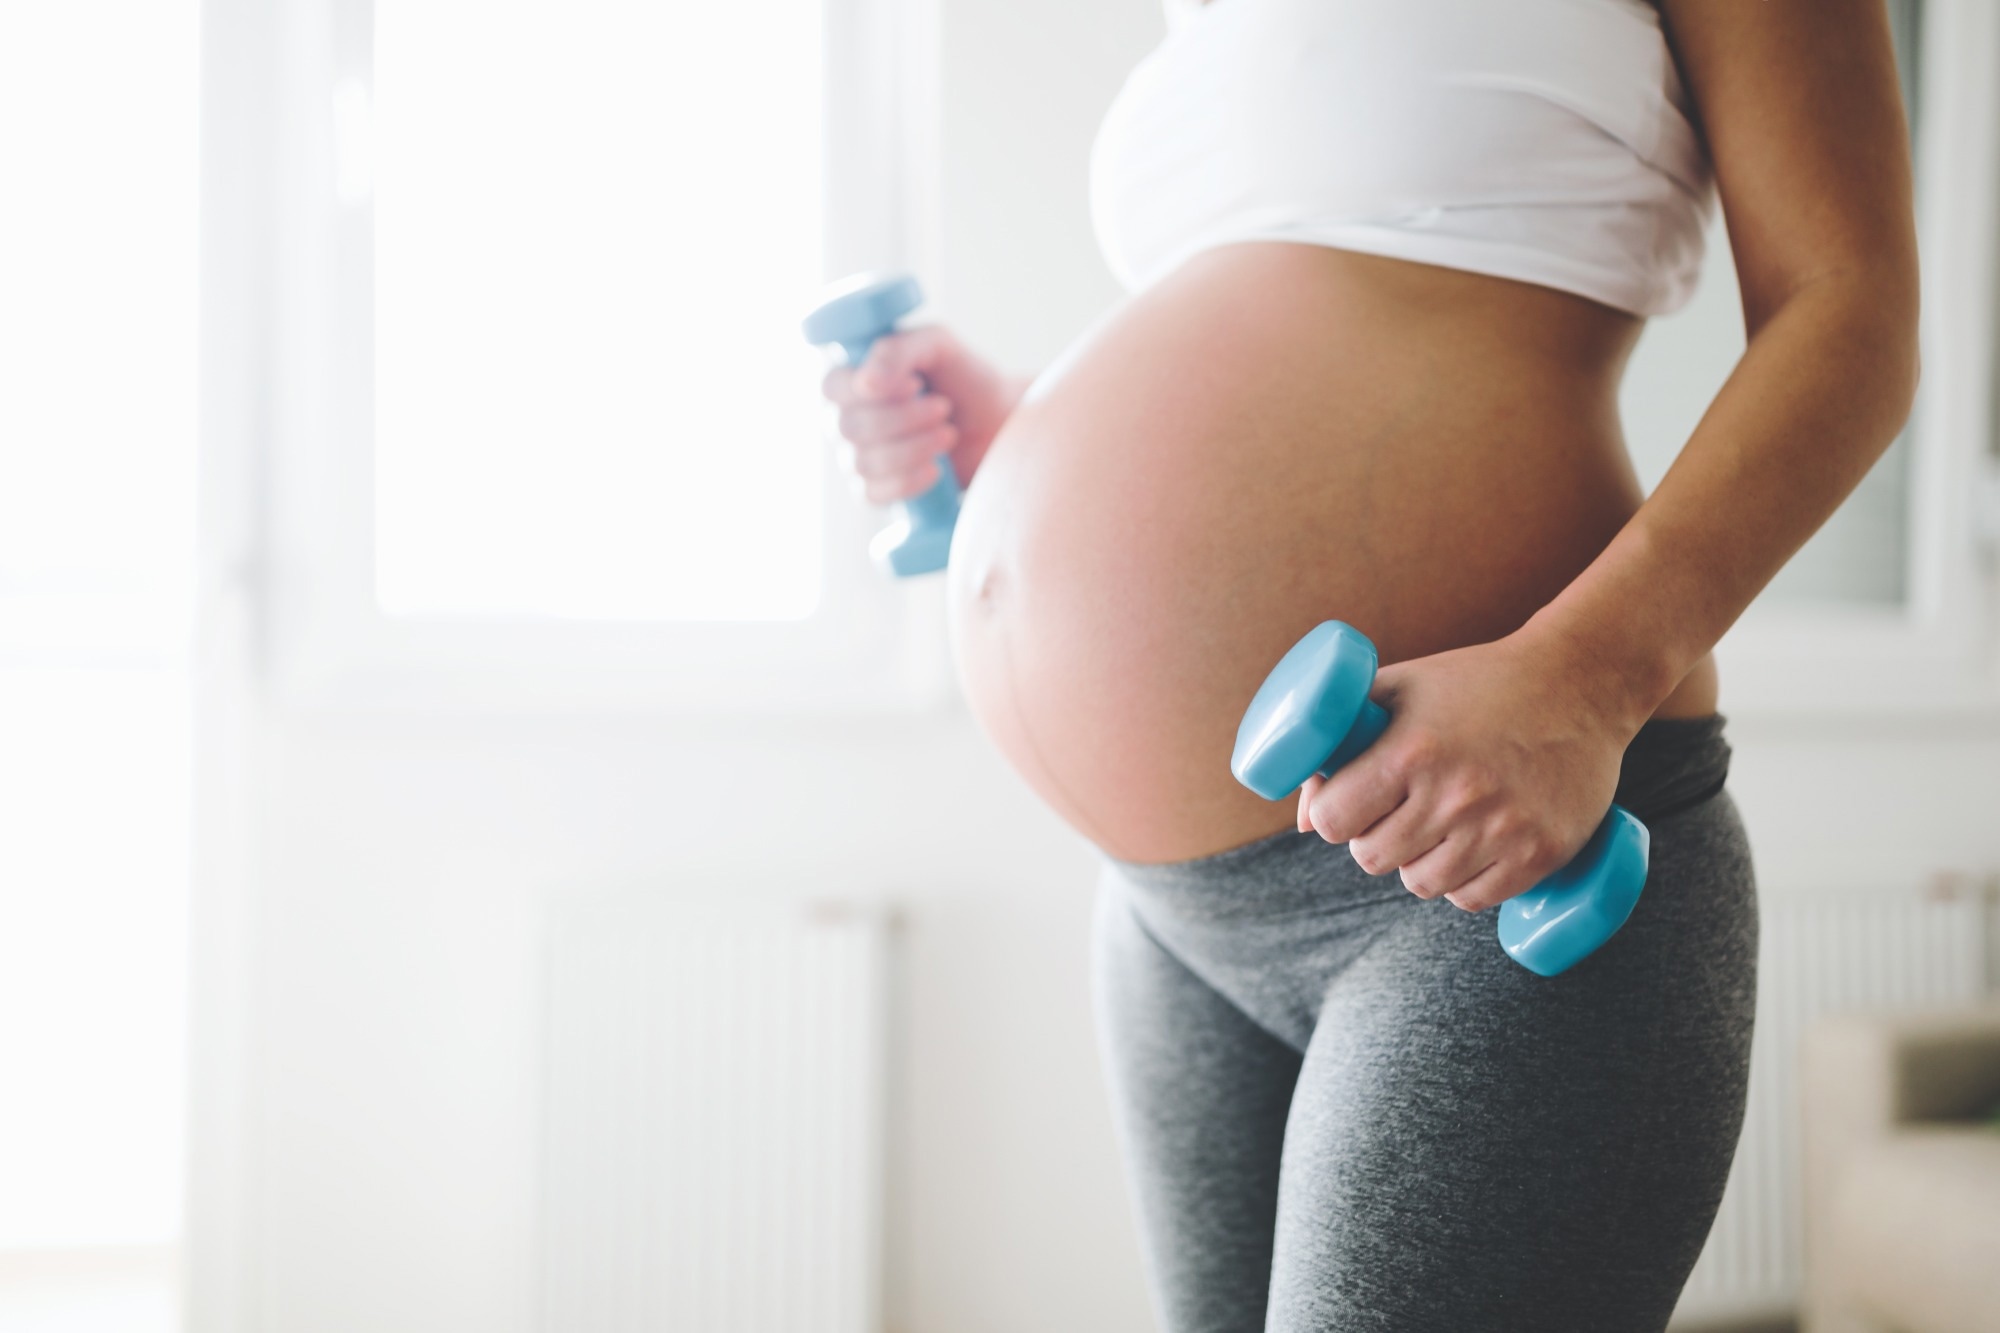 Study: The effect of physical activity on fertility: a mini-review. Image Credit: NDABCreativity/Shutterstock.com